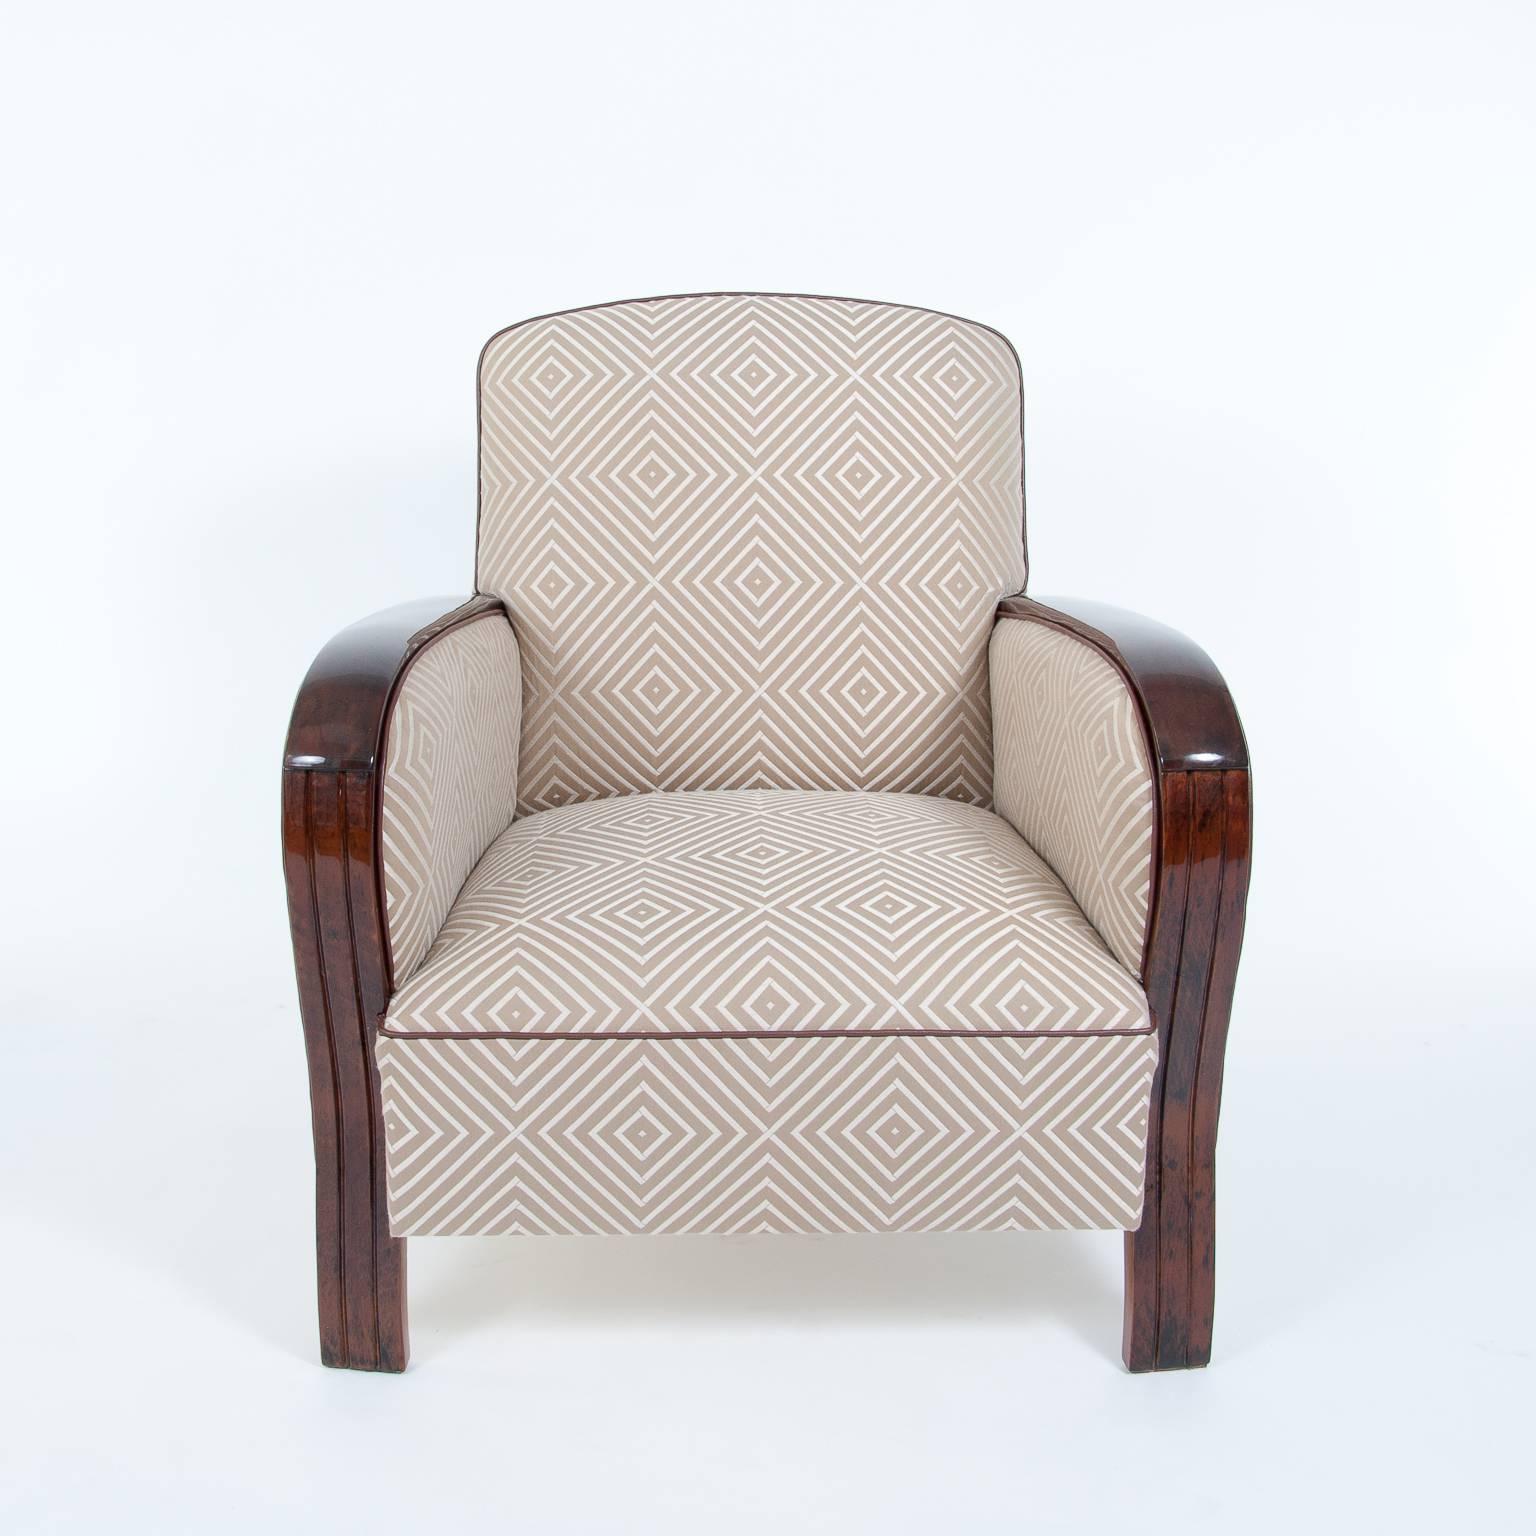 High quality, French Art Deco club chairs from France around 1940. The wooden armrests have a glossy polish and a creme-white upholstery with rectangle ornaments. The cord edge is made from artificial leather and fits perfect to the same colored